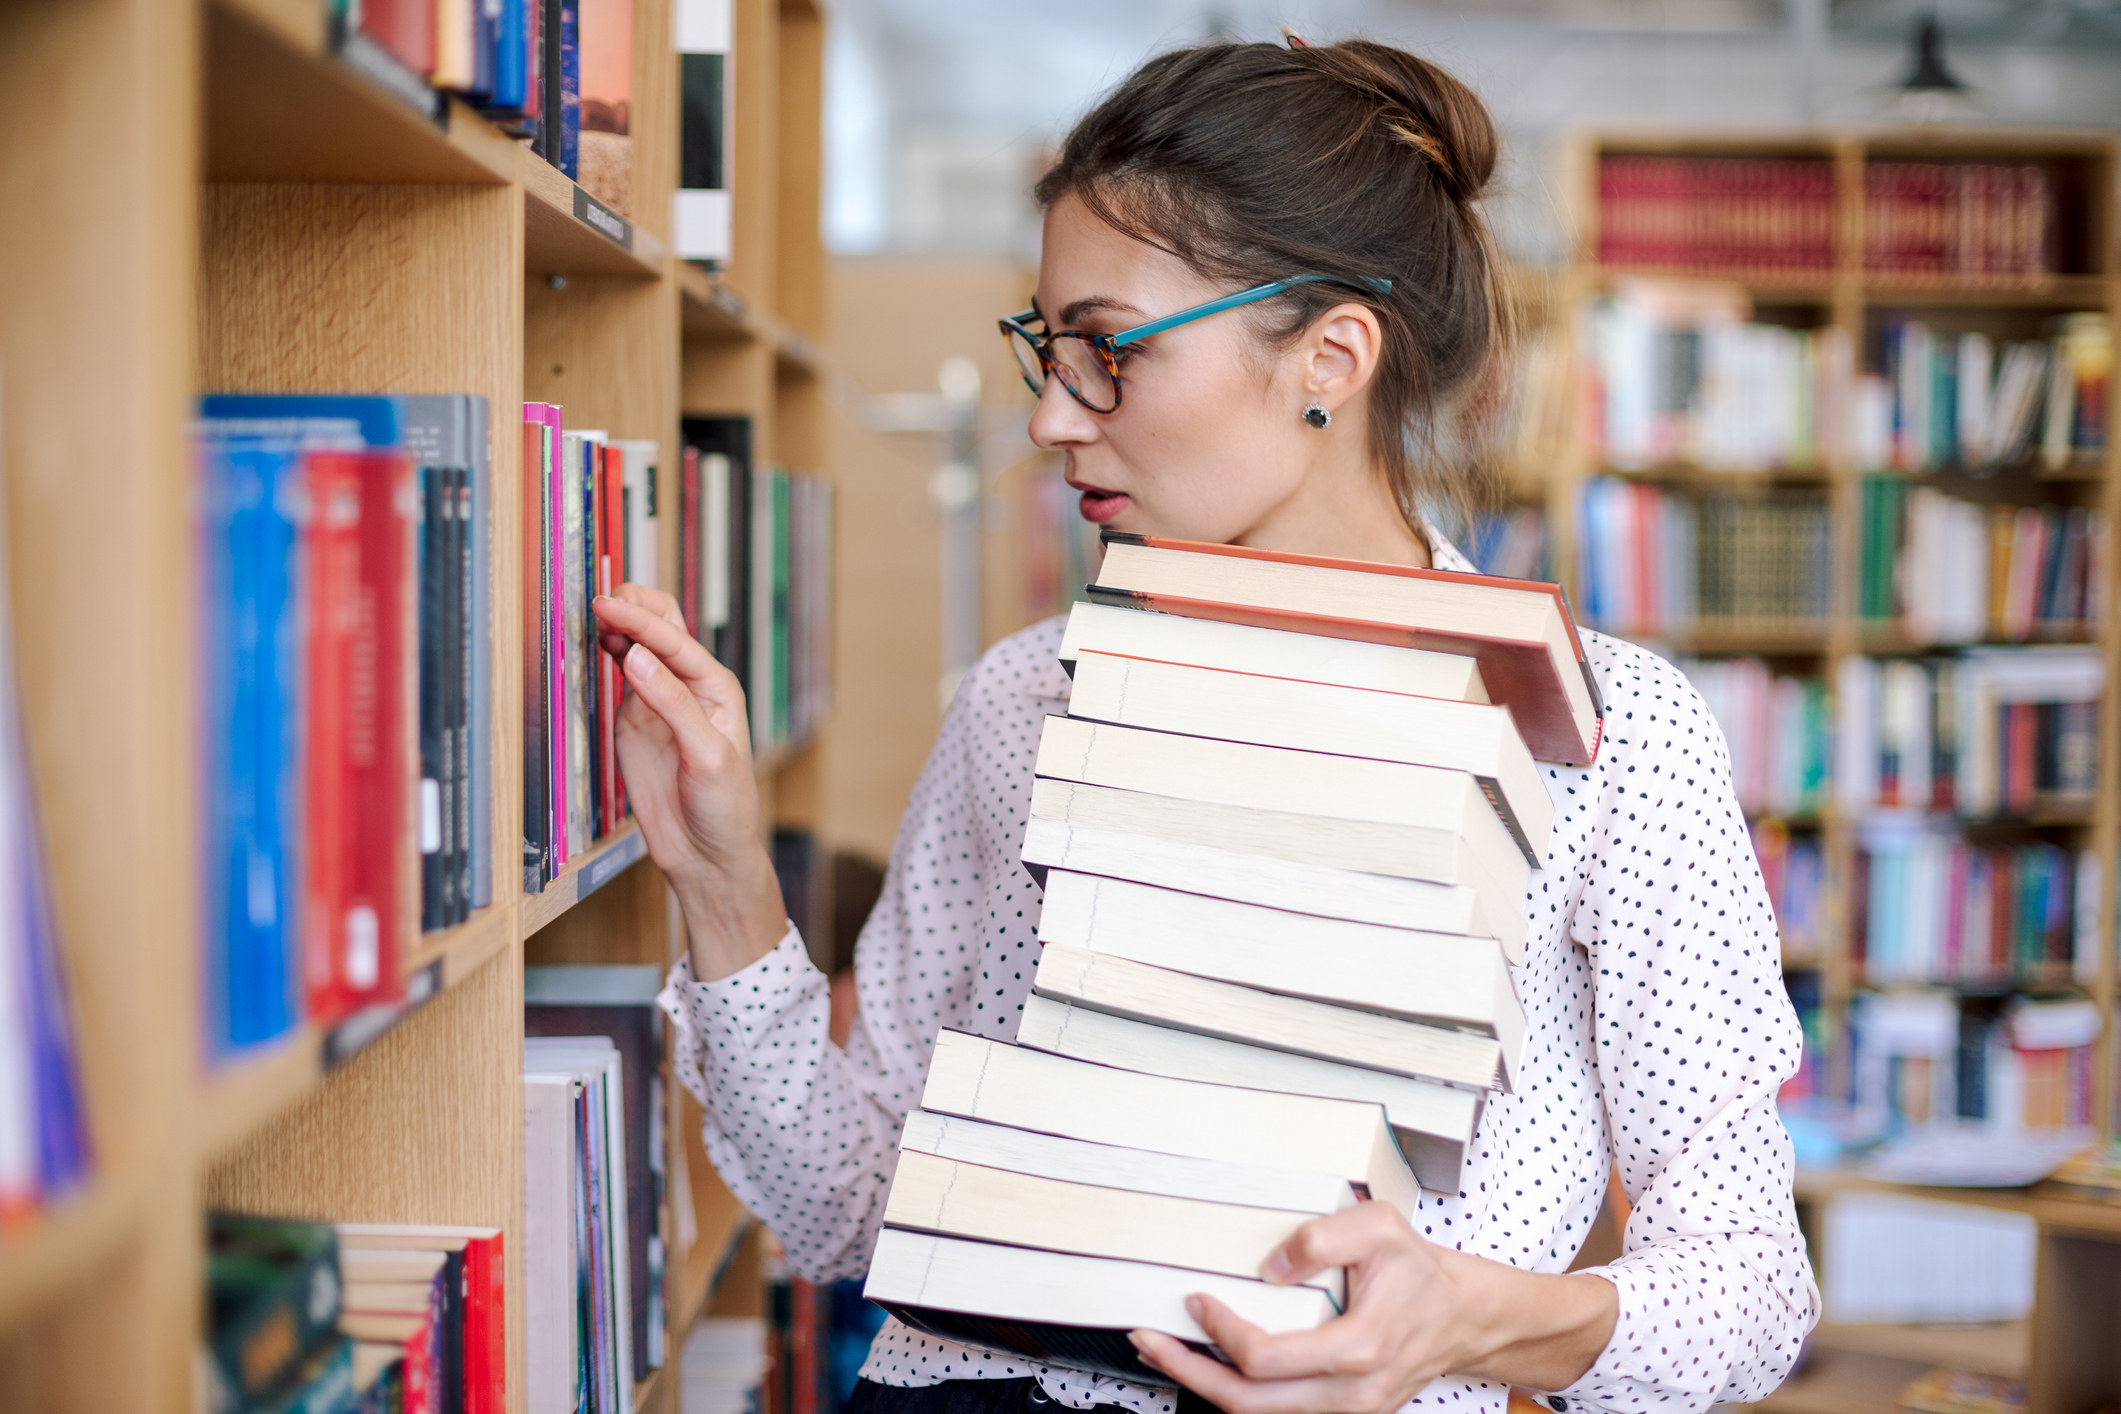 A person in a library holding a stack of books